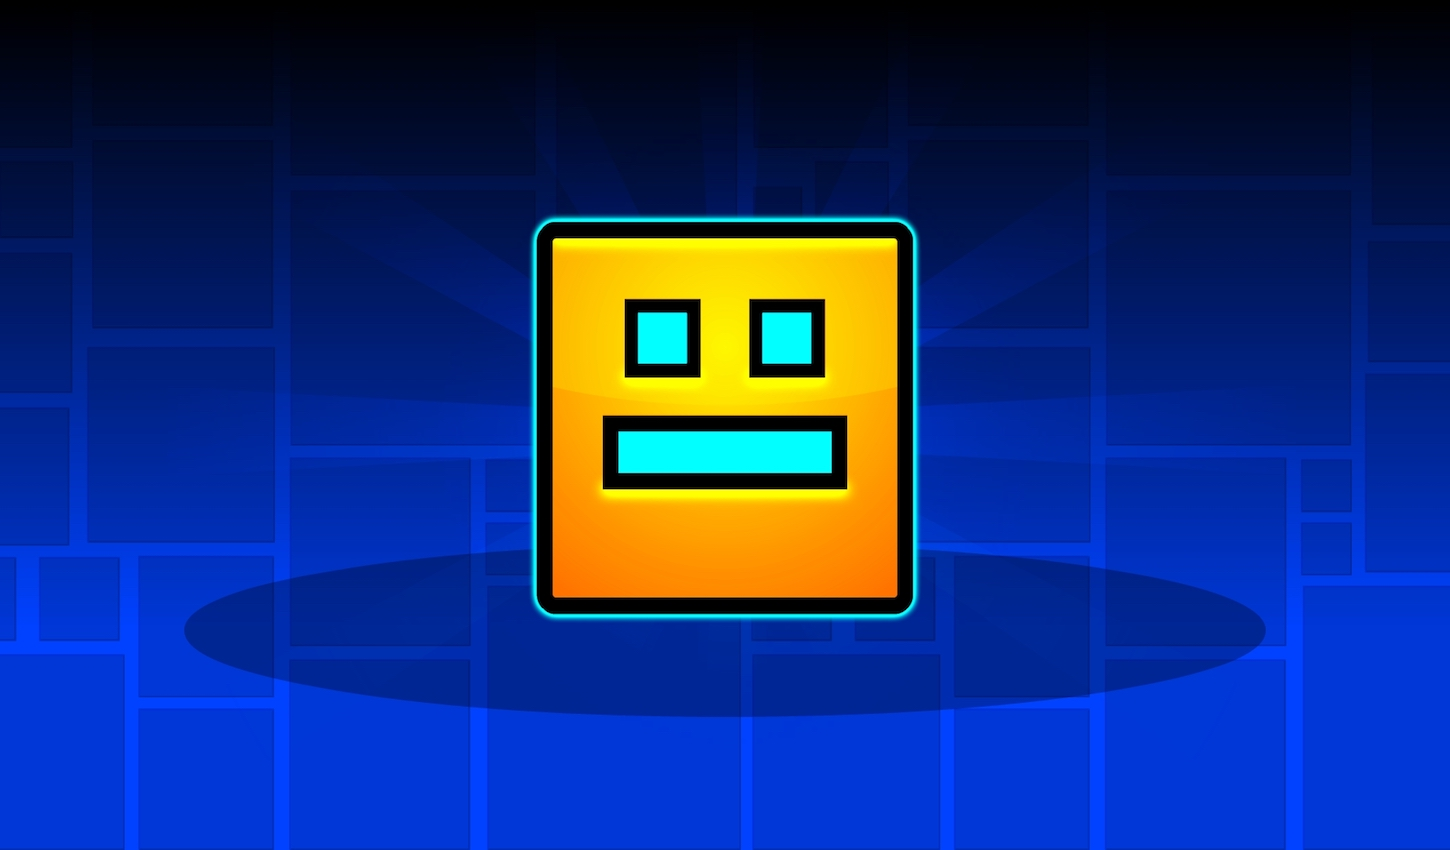 Geometry Dash Scratch best levels – Sub Zero, and more